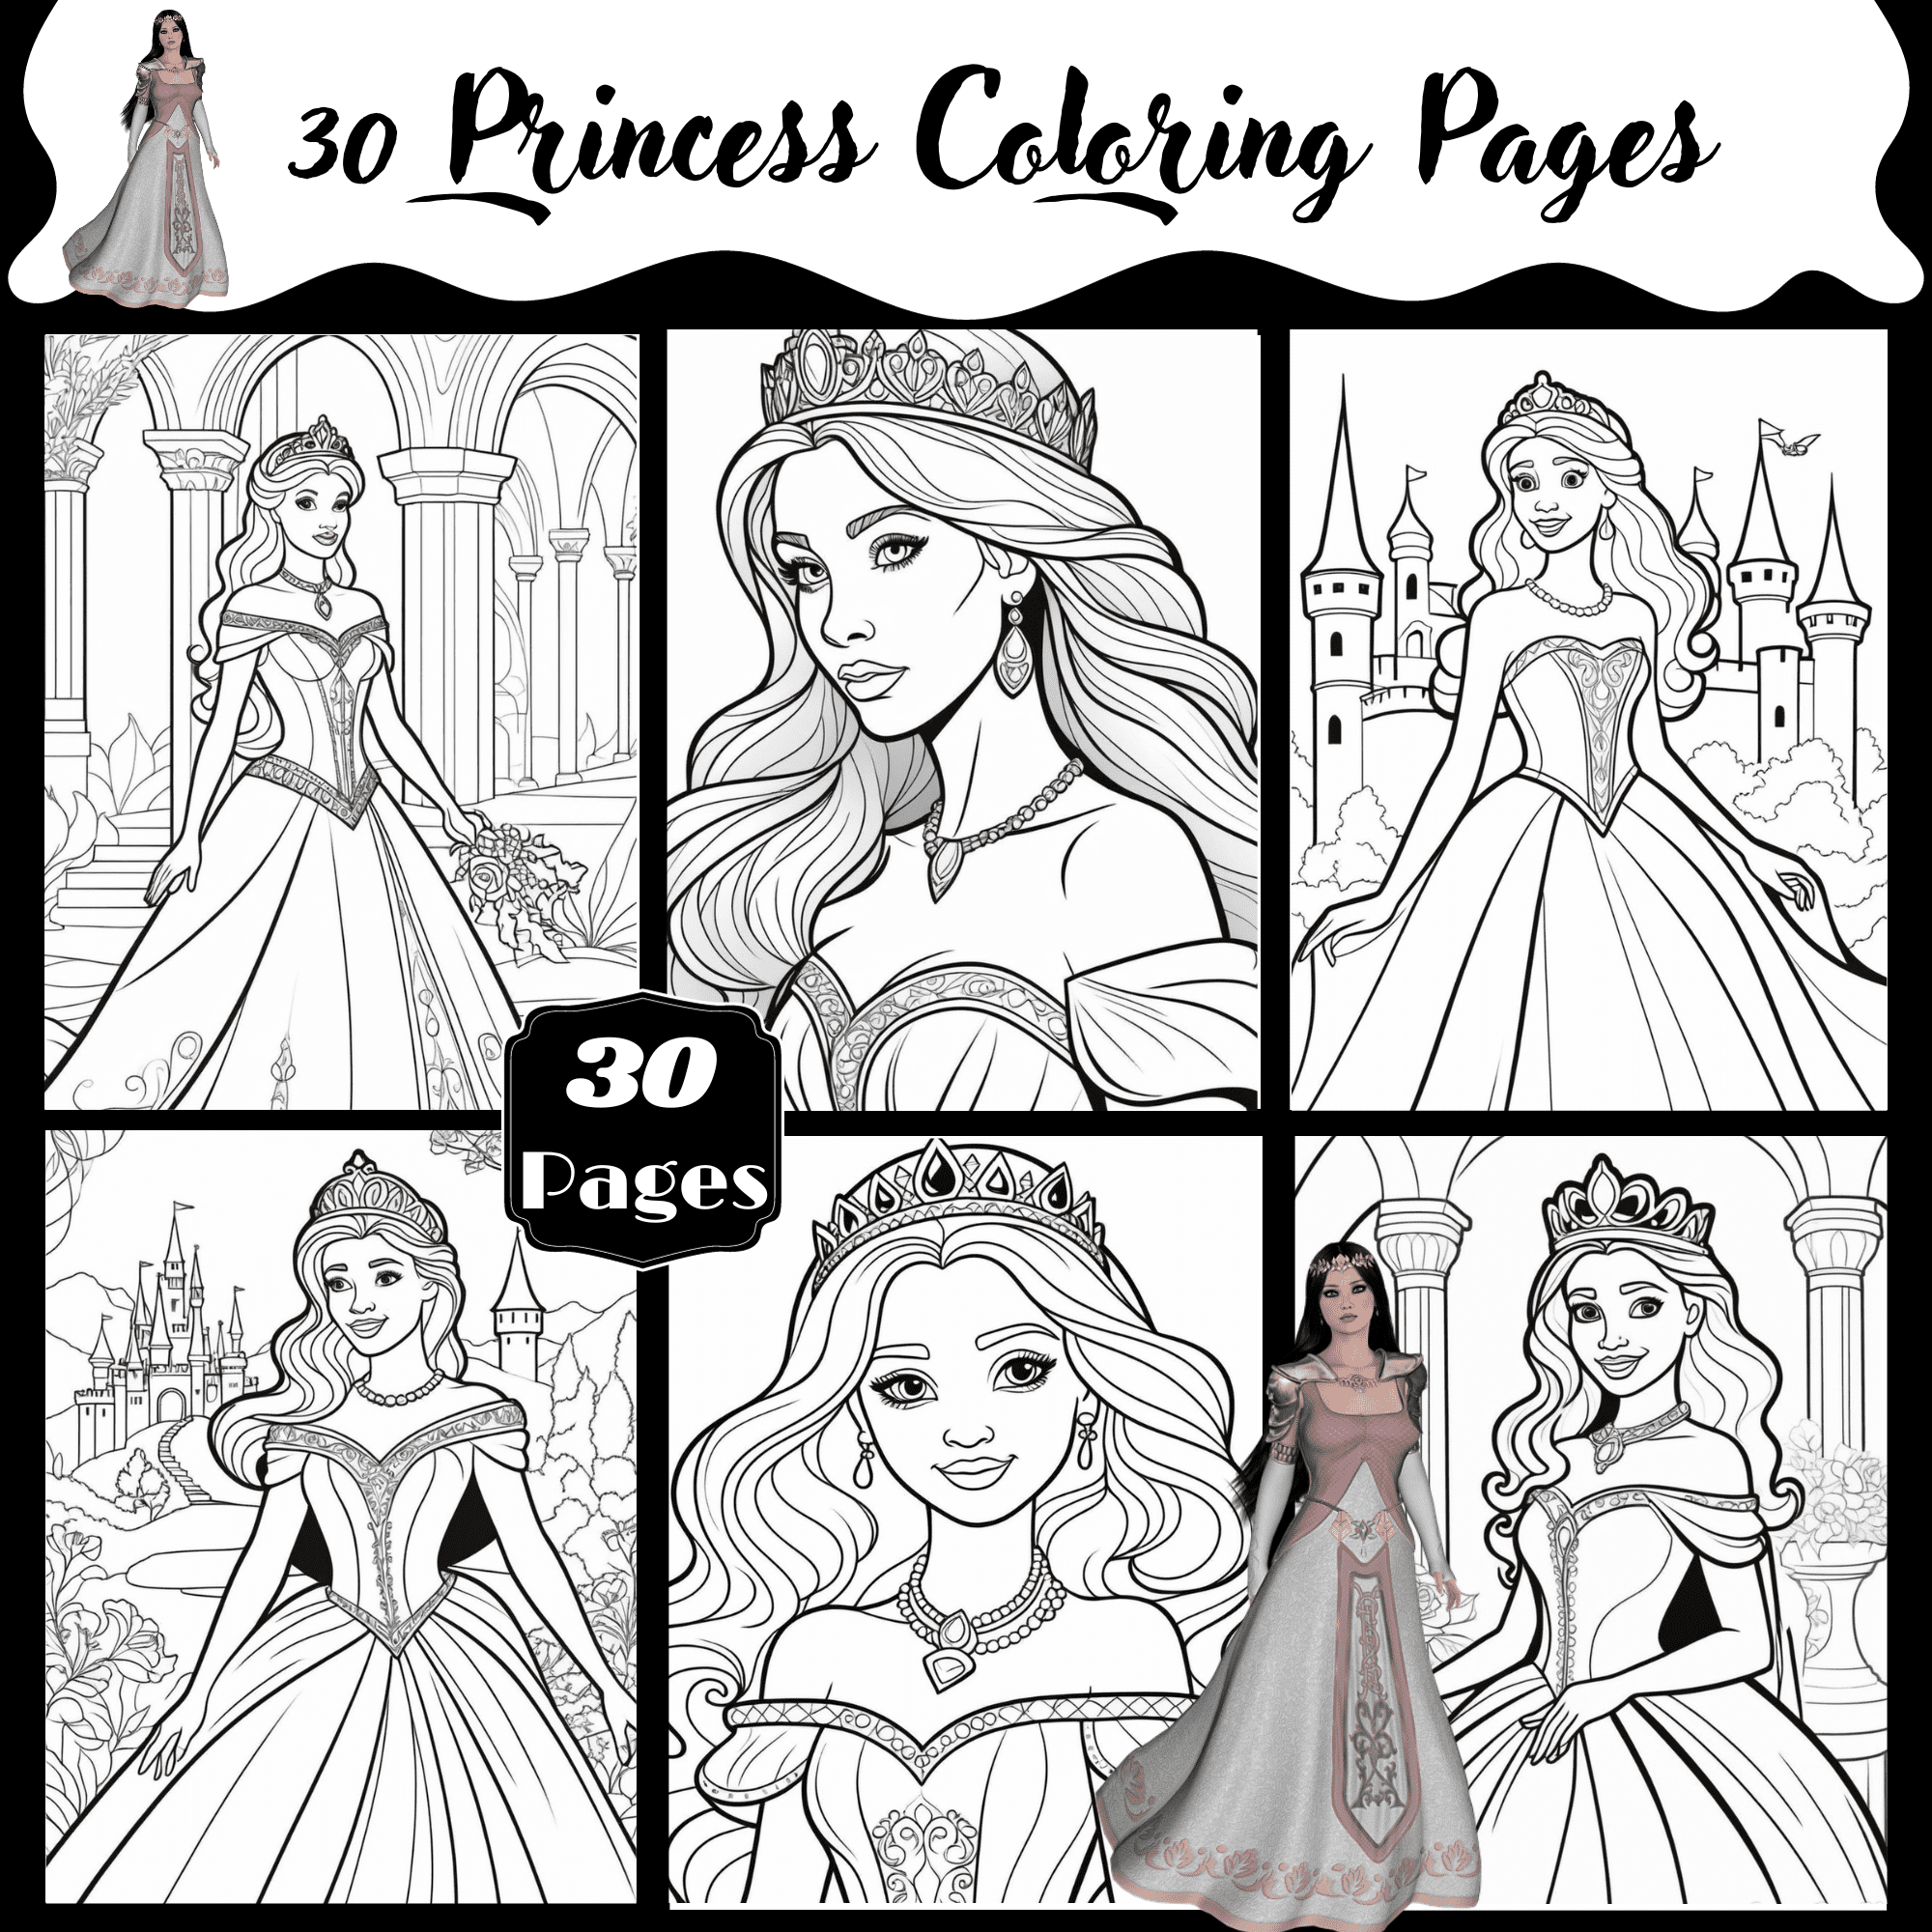 Princess coloring pages made by teachers